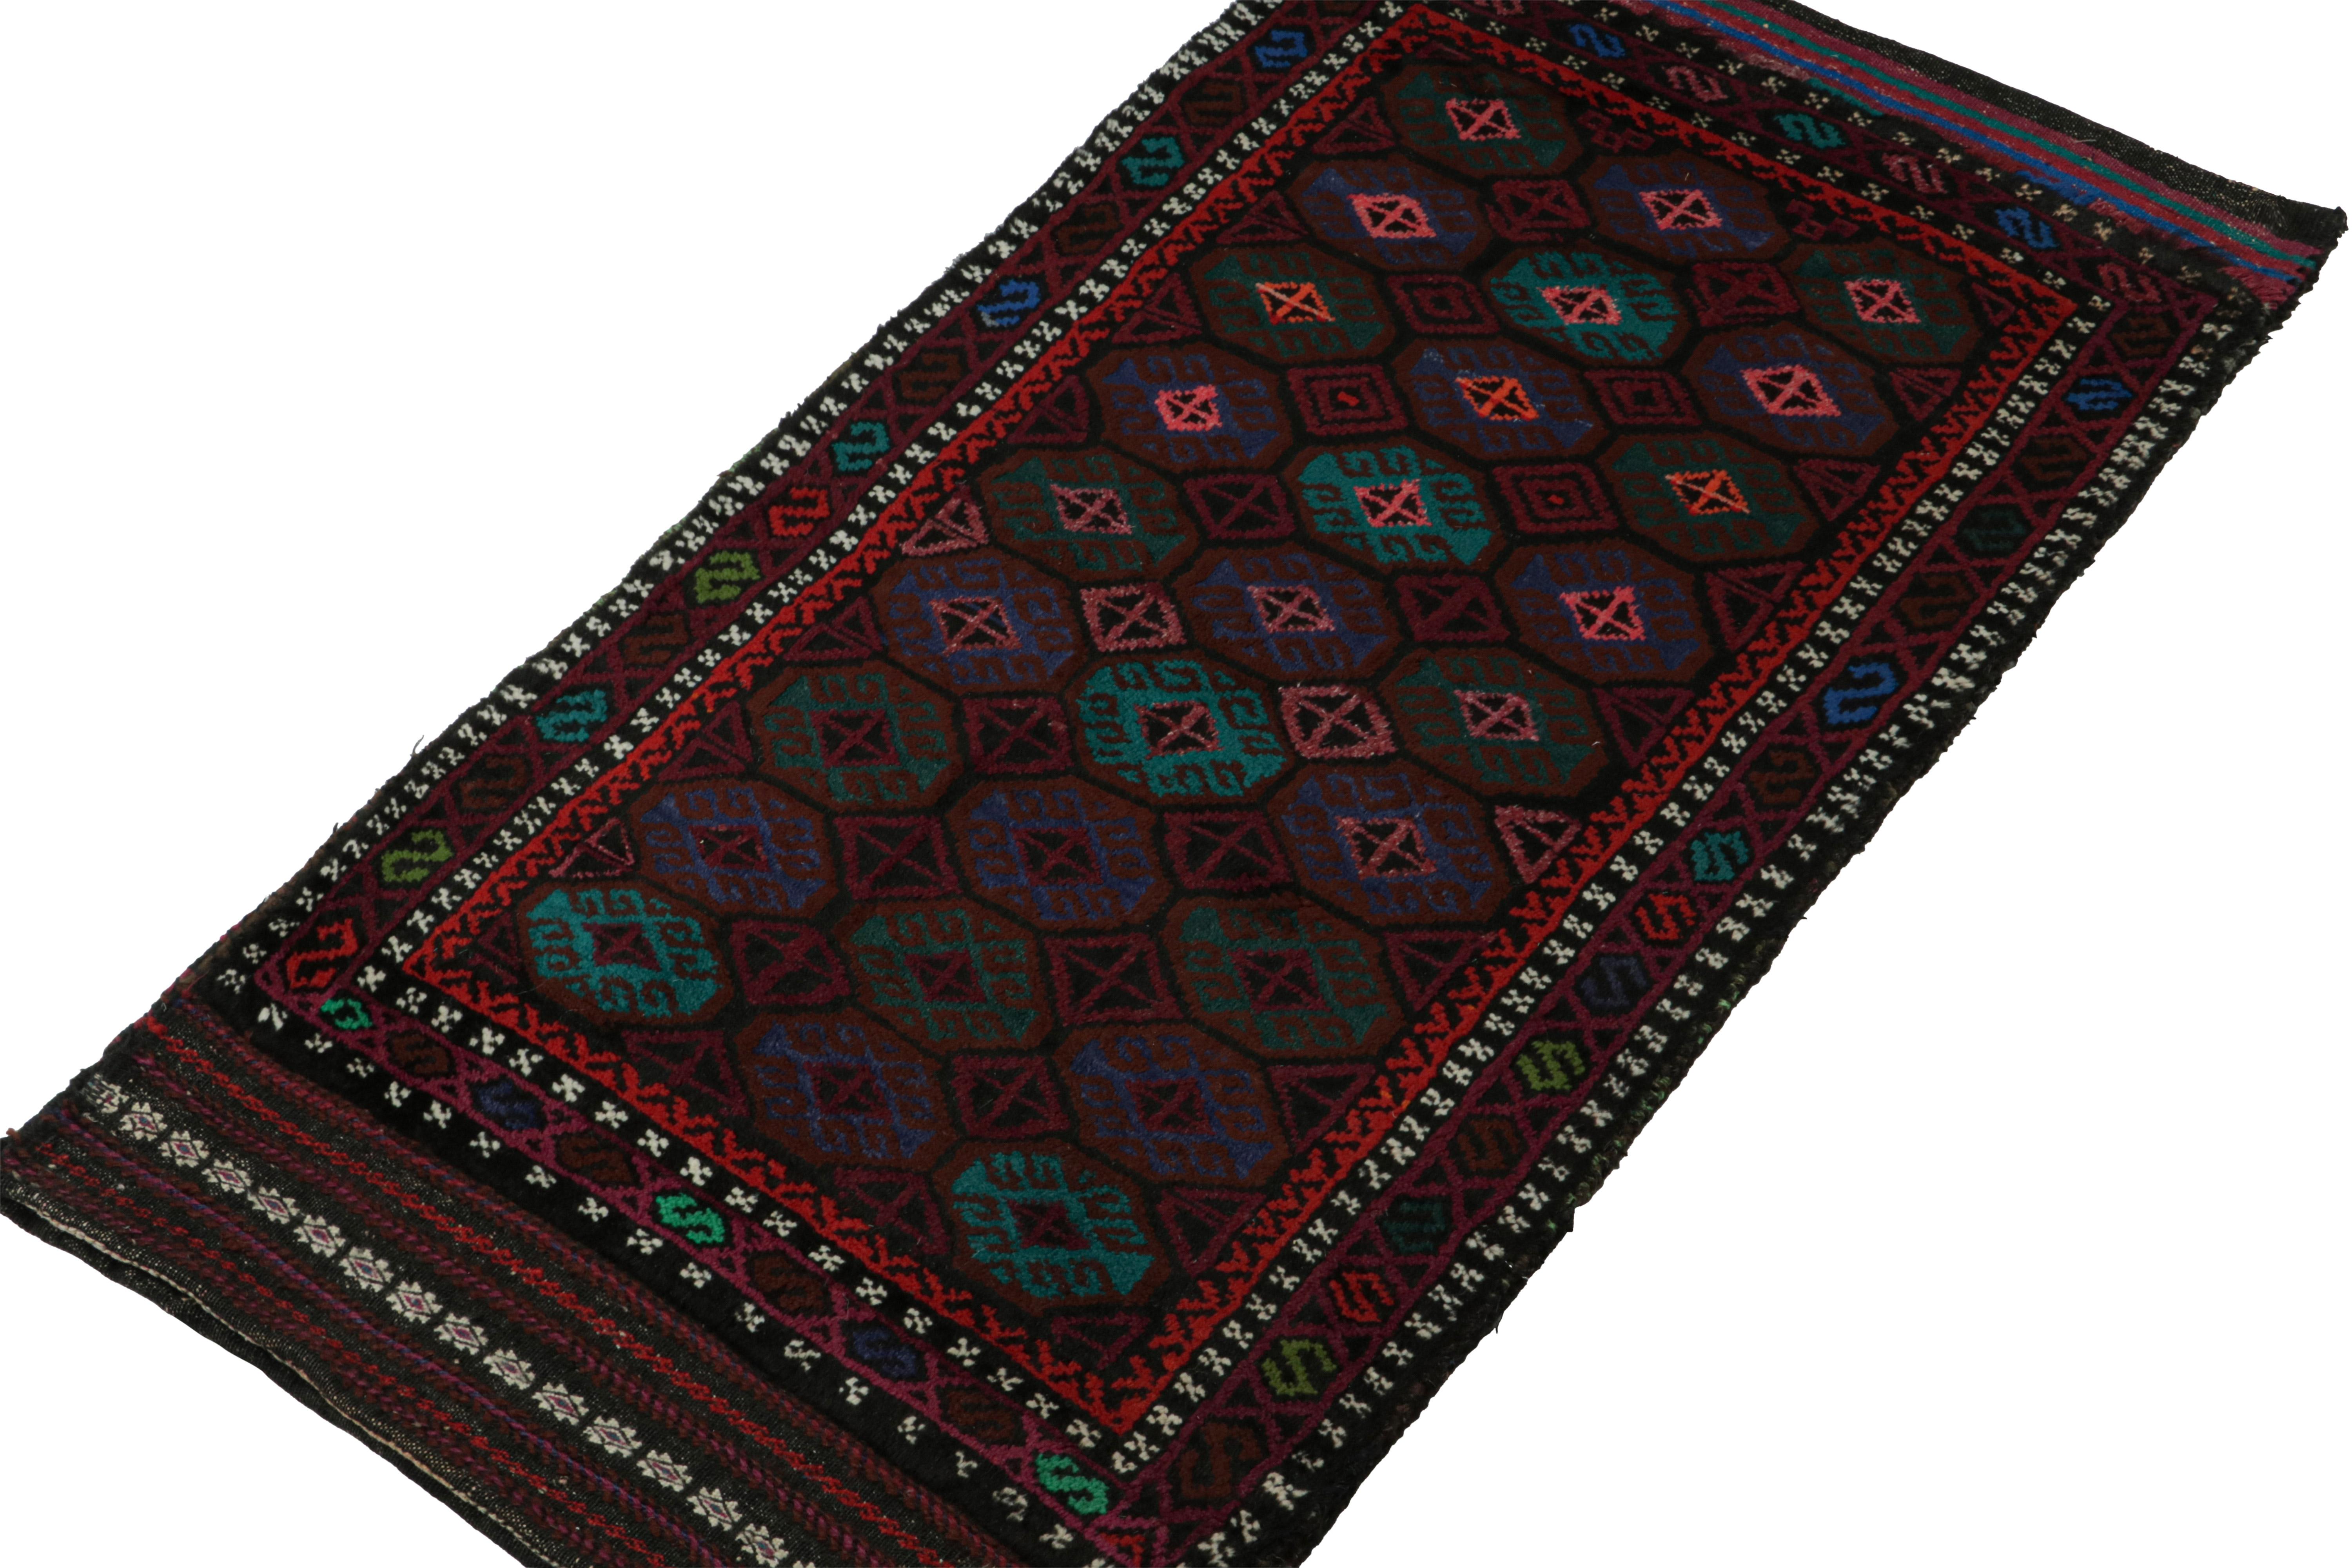 Hand-knotted in wool, this 2x4 Baluch Persian rug of the 1950s is the latest to enter Rug & Kilim’s Antique & Vintage collection.

On the Design:

This vintage Baluch rug carries tribal patterns encased in octagons relishing brown, green, blue &